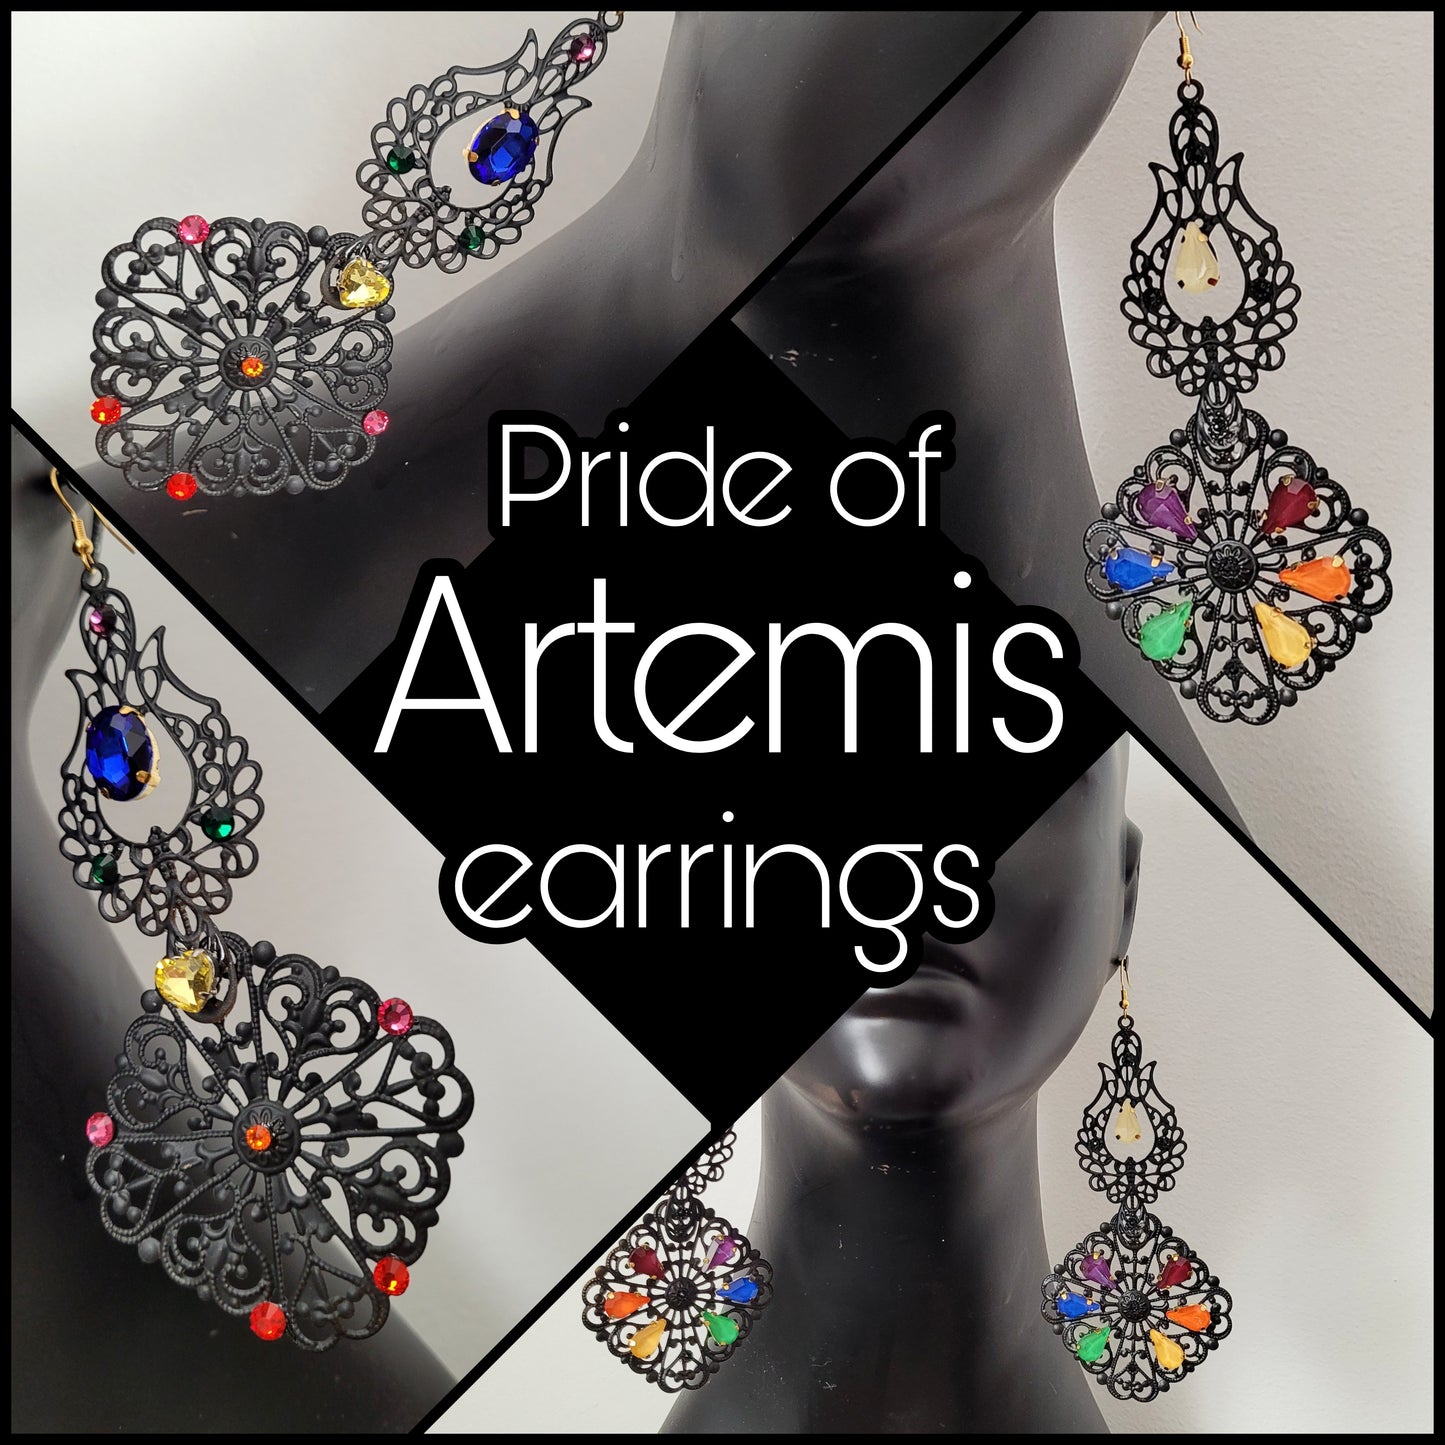 Deusa ex Machina collection: The Pride of Artemis earrings